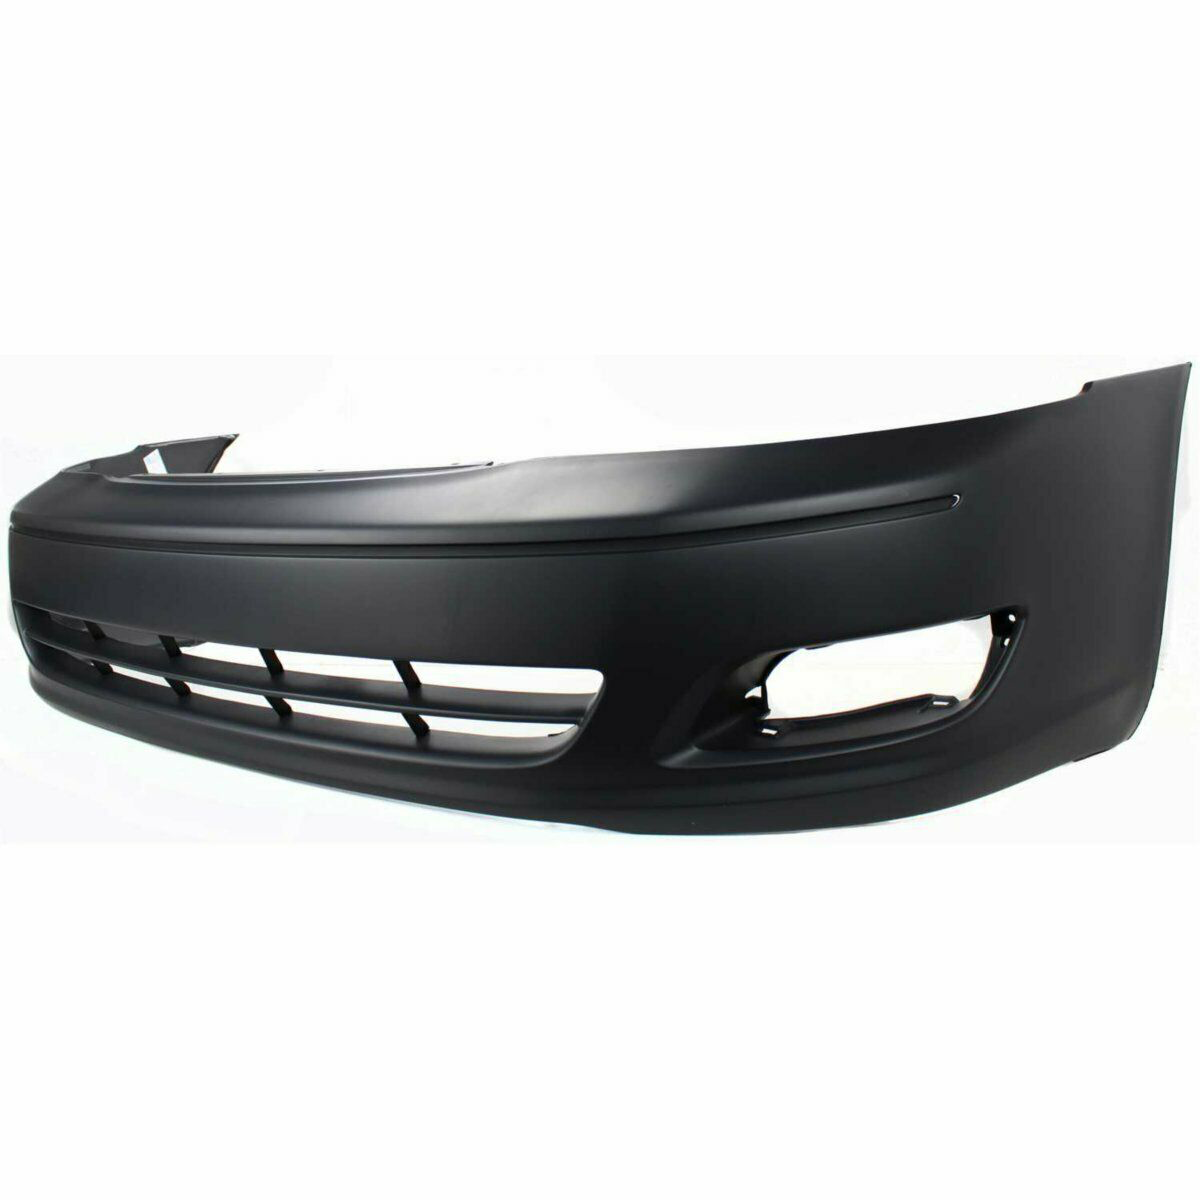 2000-2002 Toyota Avalon Front Bumper Painted to Match